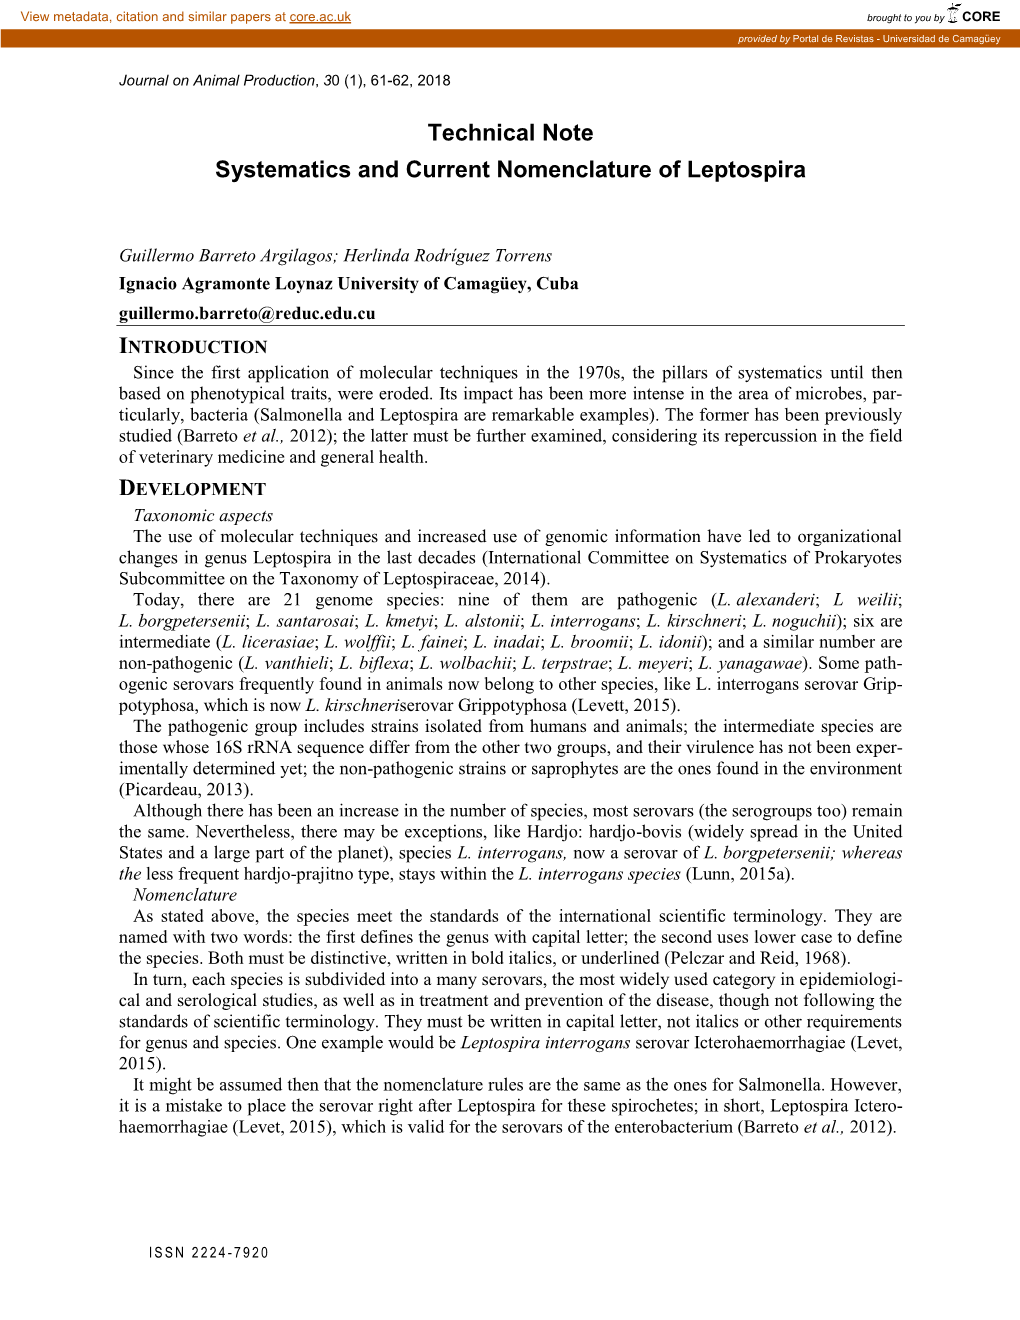 Technical Note. Systematics and Current Nomenclature of Leptospira